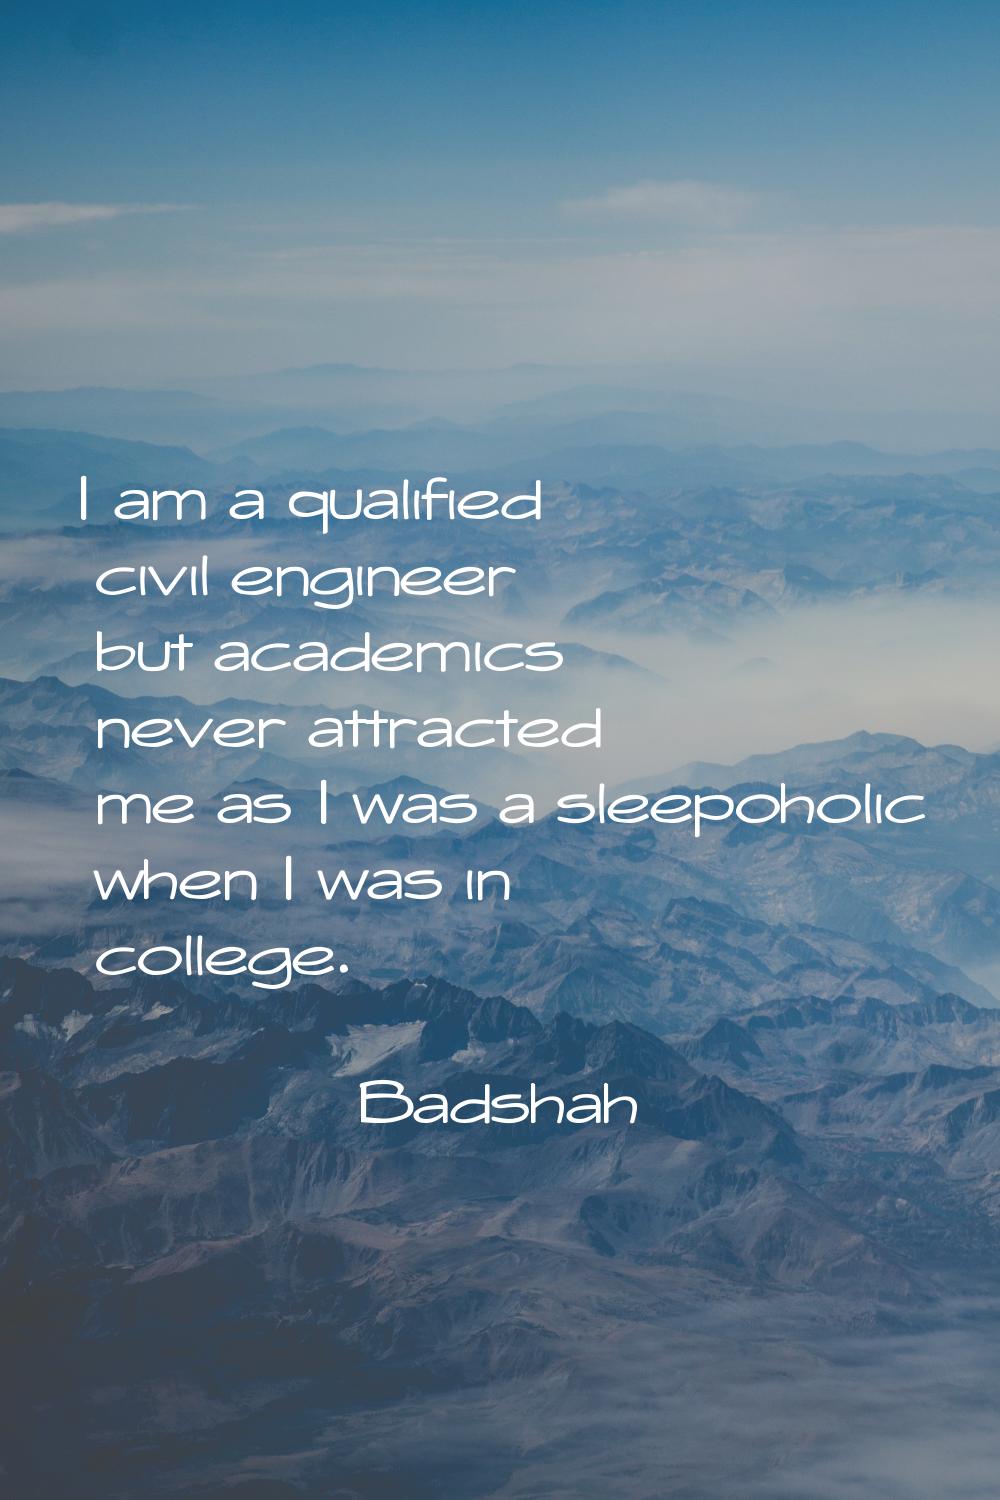 I am a qualified civil engineer but academics never attracted me as I was a sleepoholic when I was 